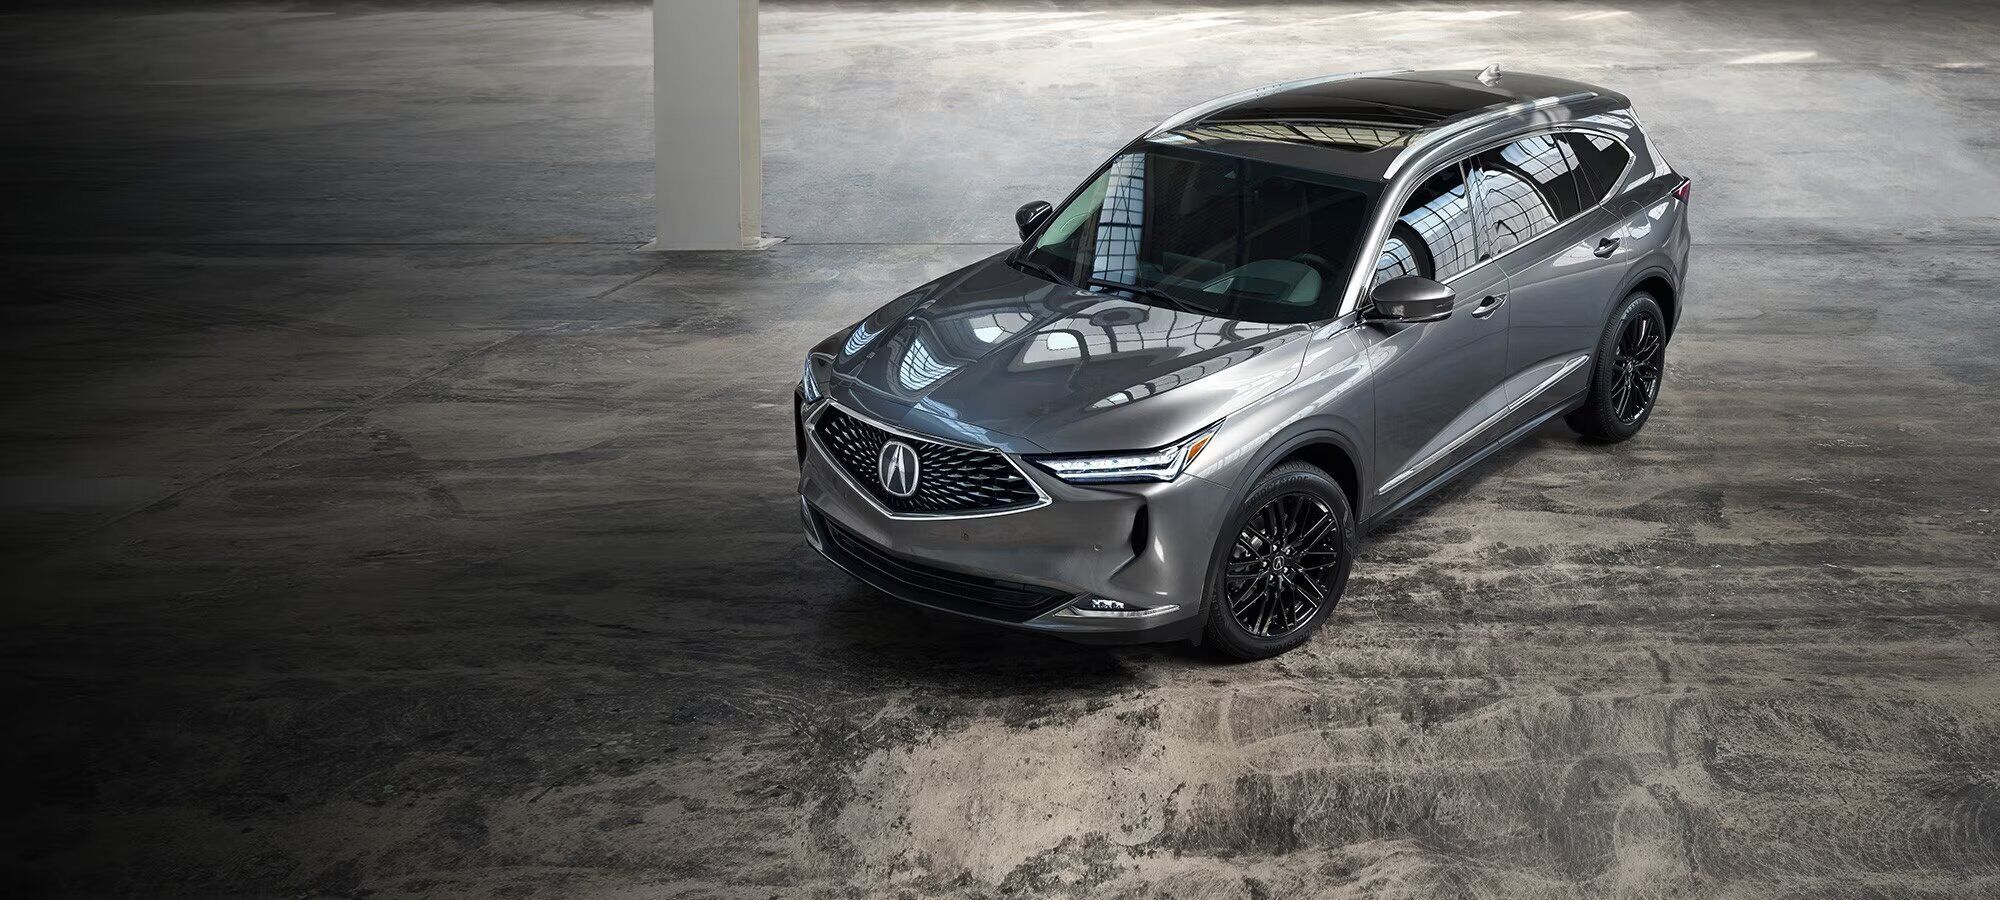 Discover the perfect certified pre-owned Acura car or SUV from our MetroWest Acura selection in Framingham, MA. Explore the features and trim packages available.